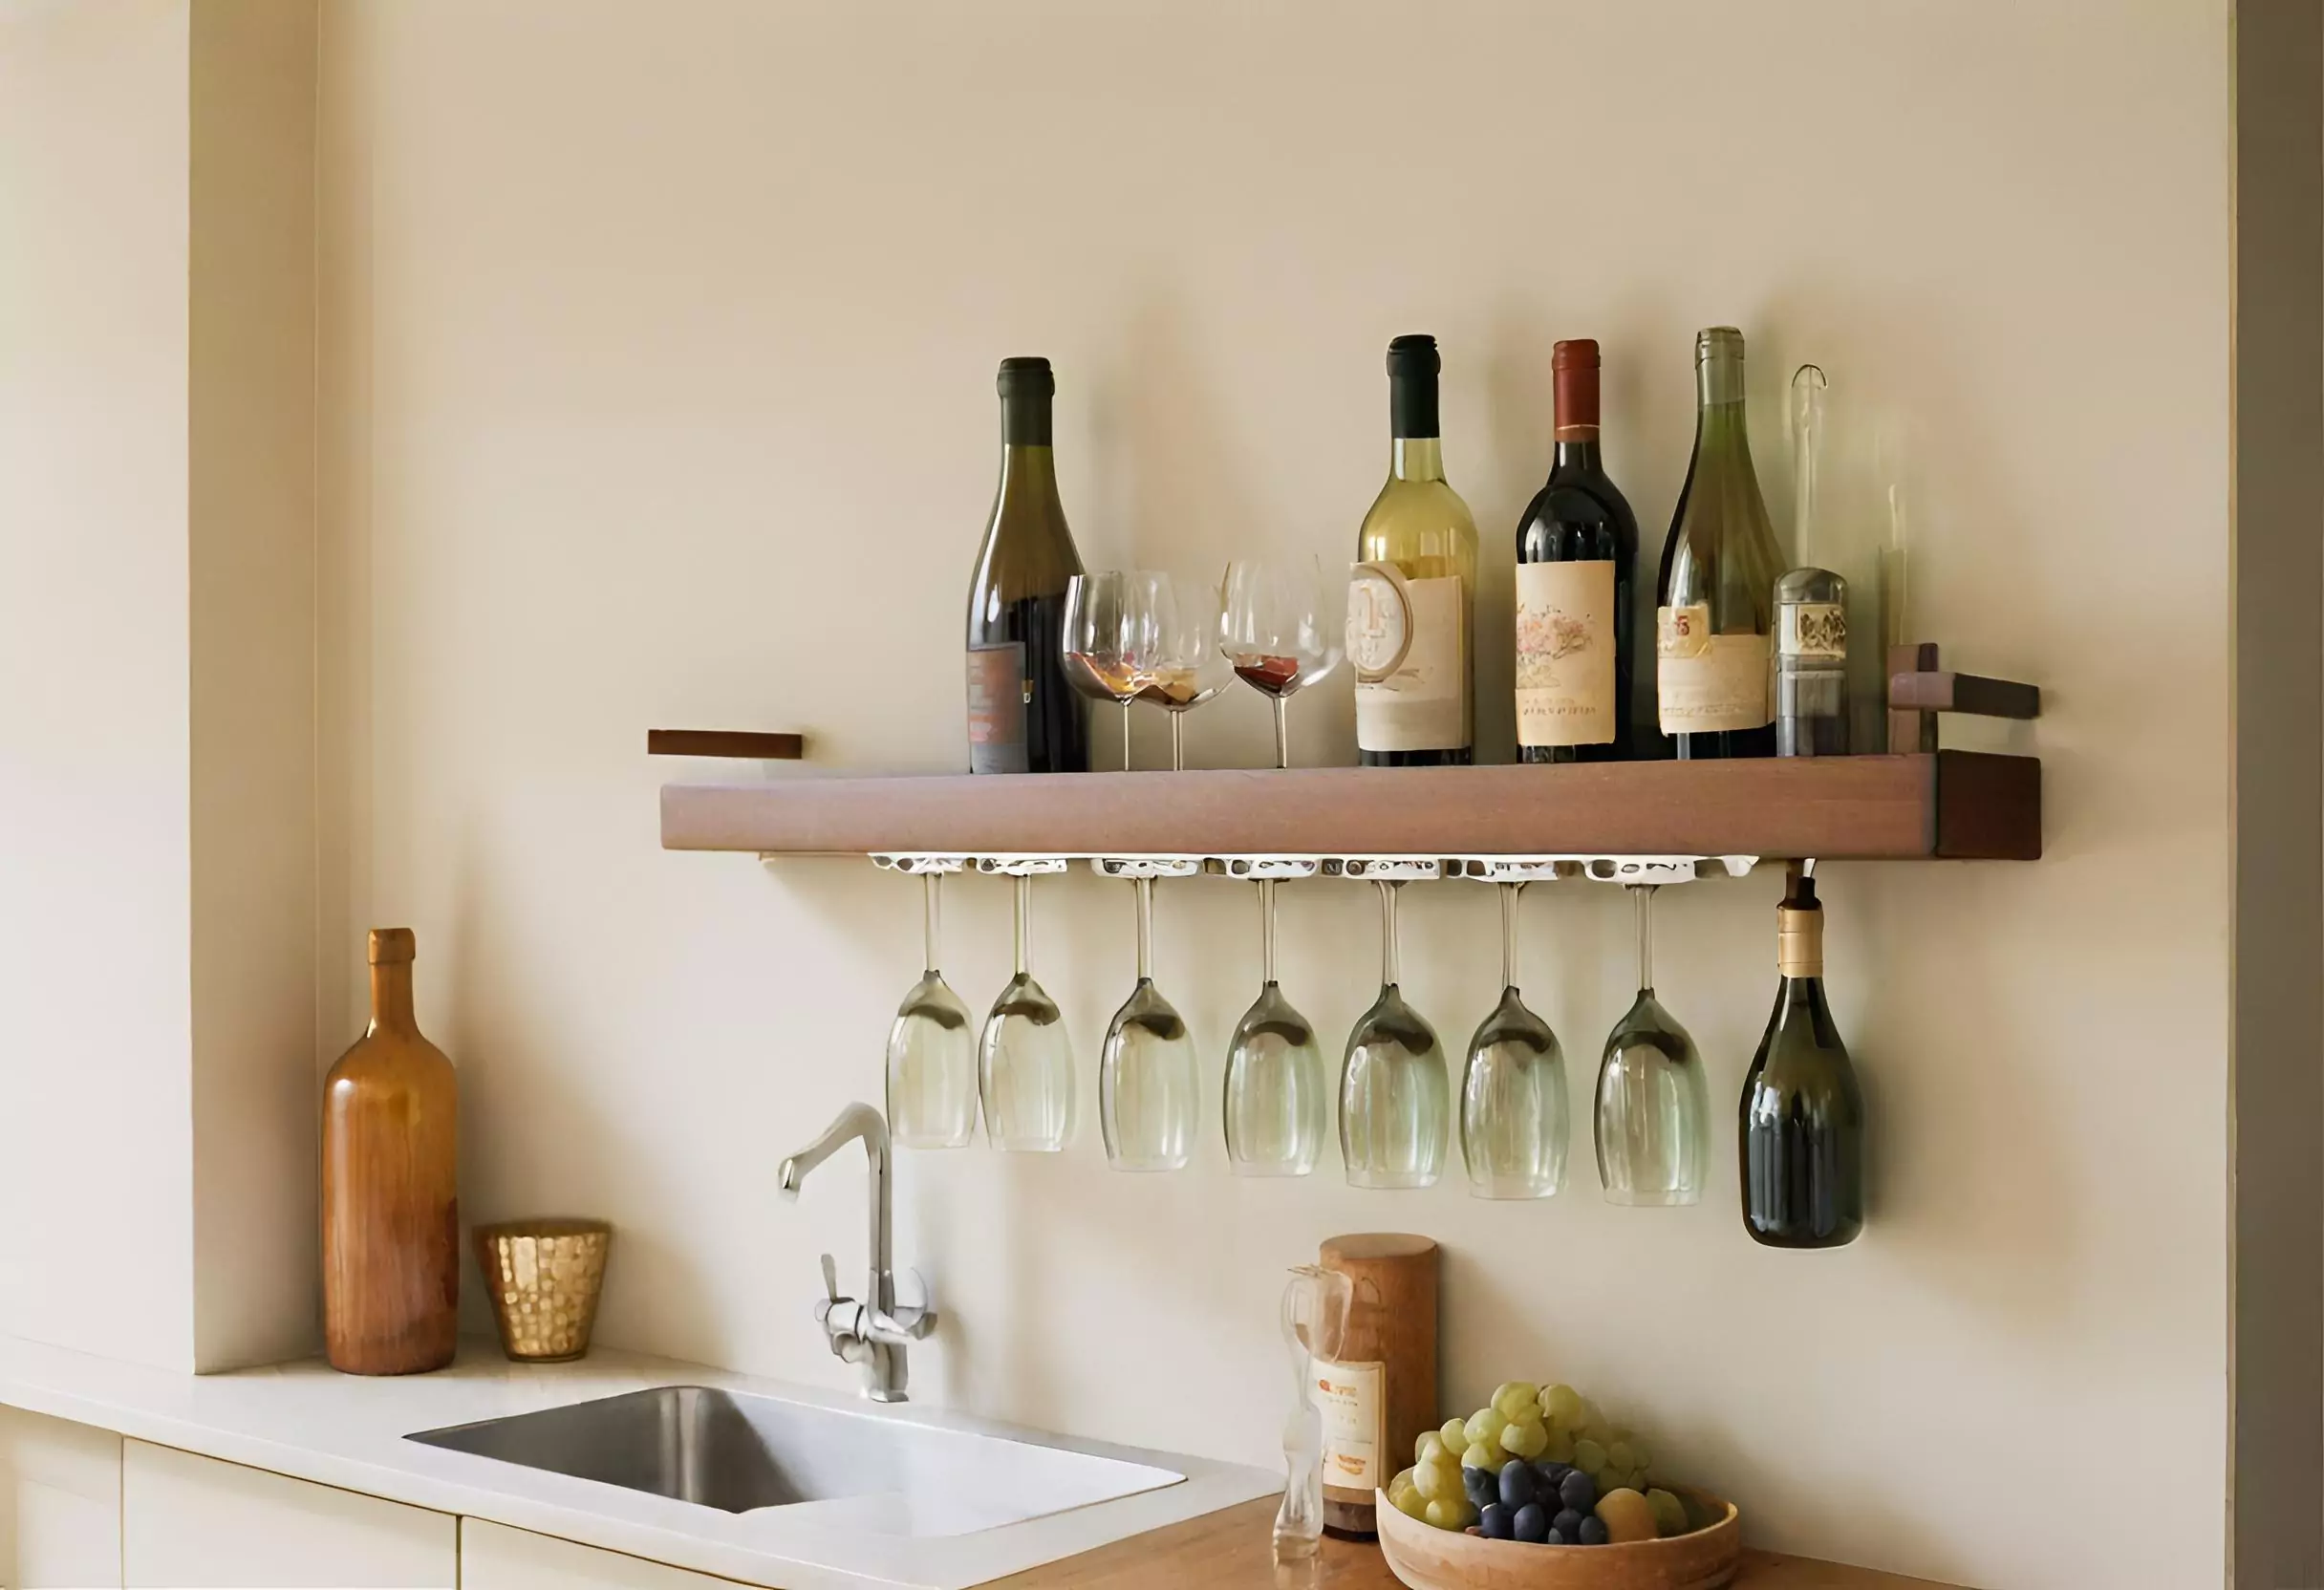 Kitchen featuring a space-saving wall-mounted bar, attached to the wall for storing wine glasses, glass bottles, and kitchen essentials.